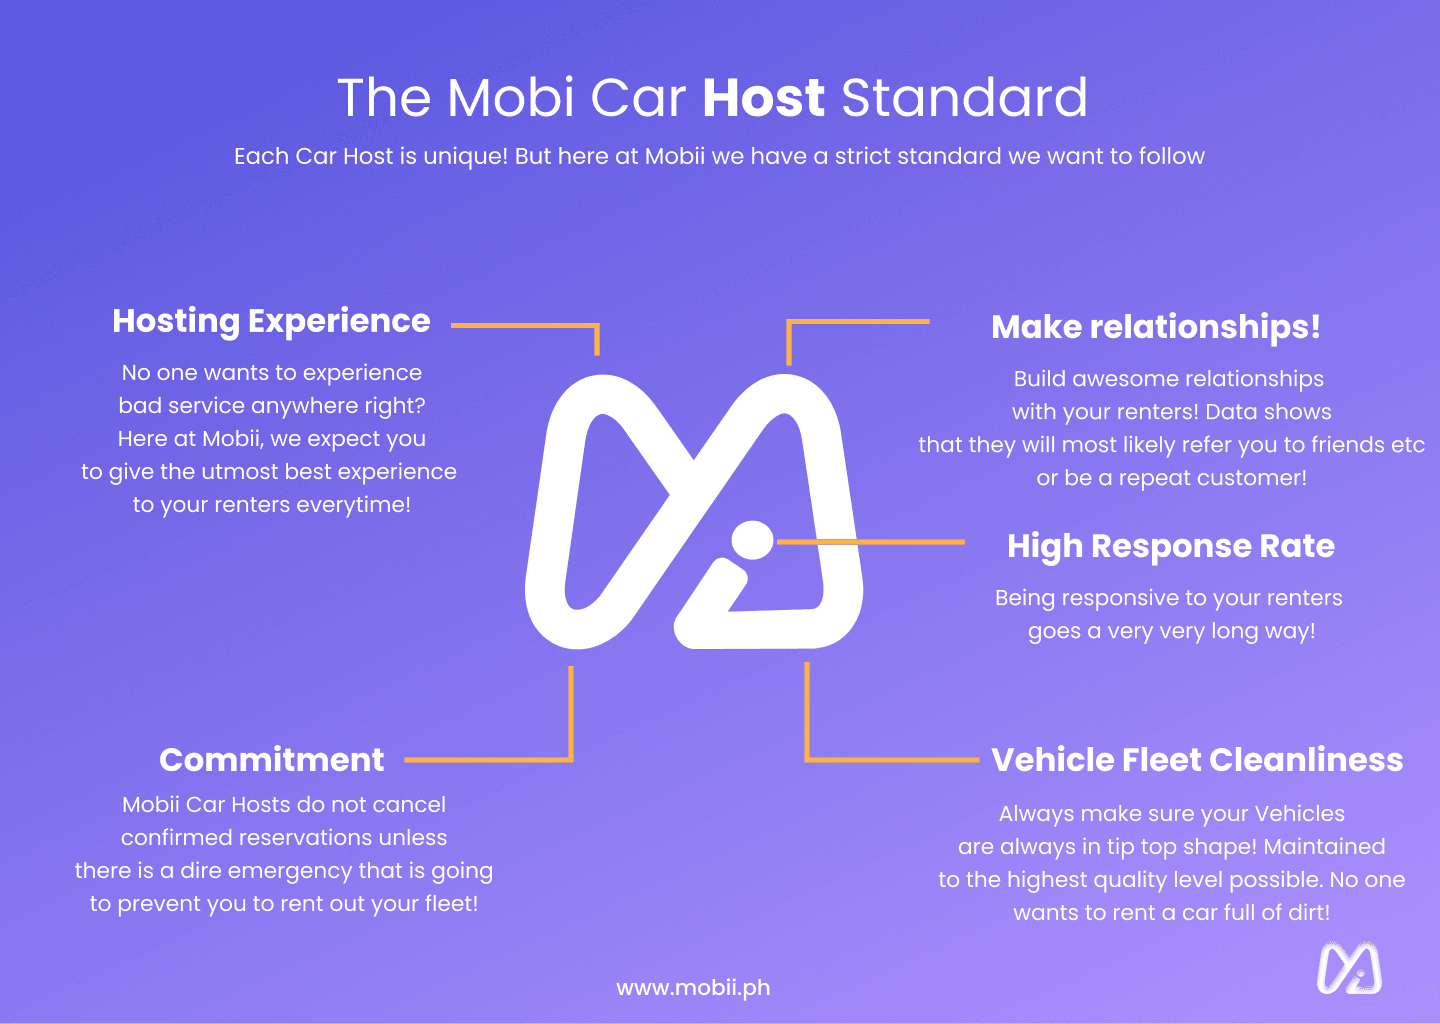 Mobii's standards of hosts